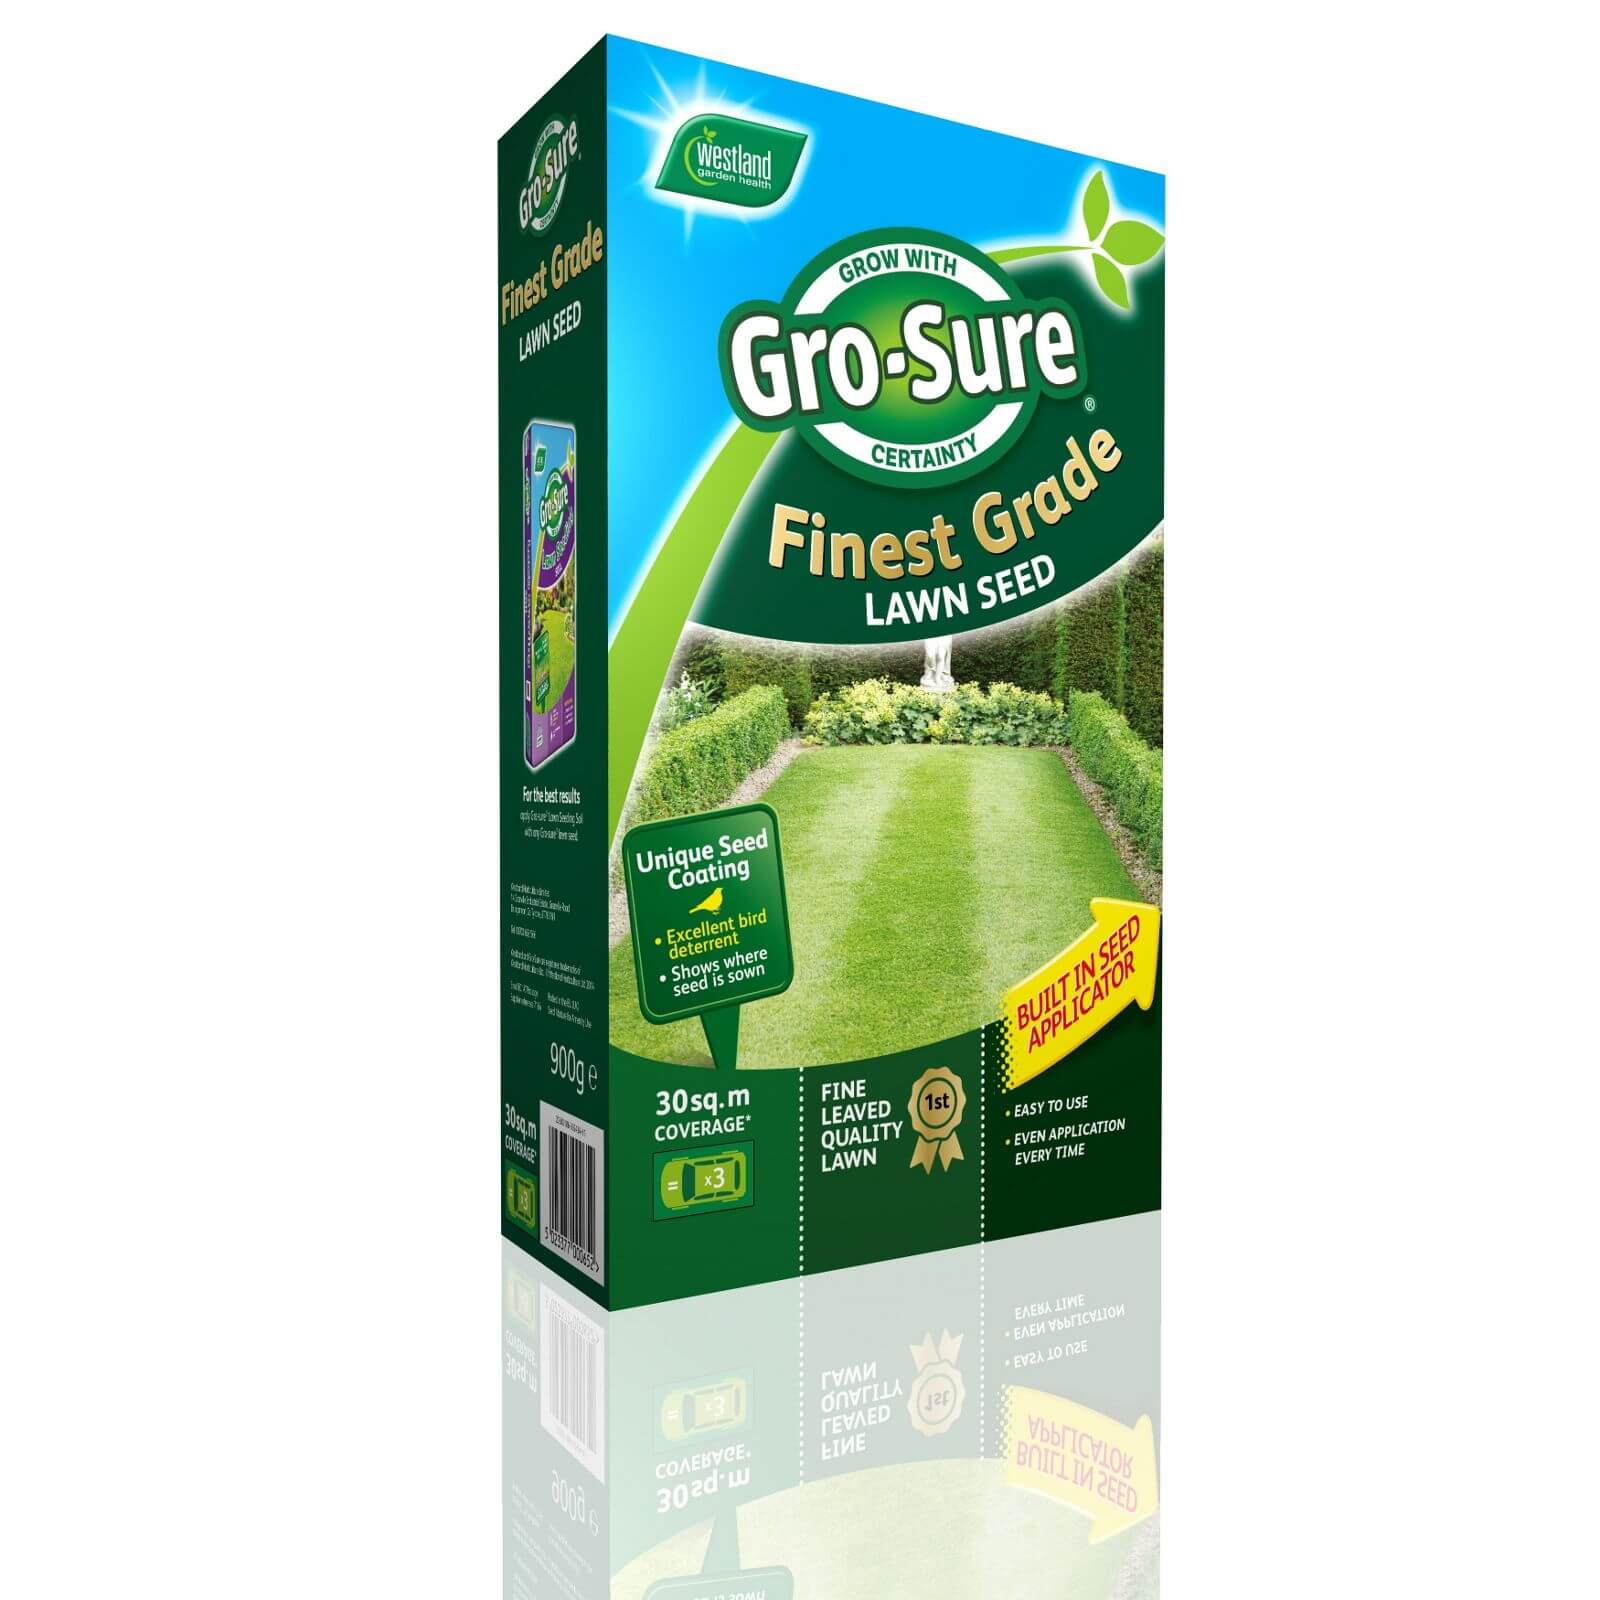 Gro-Sure Finest Lawn seed - 30m2